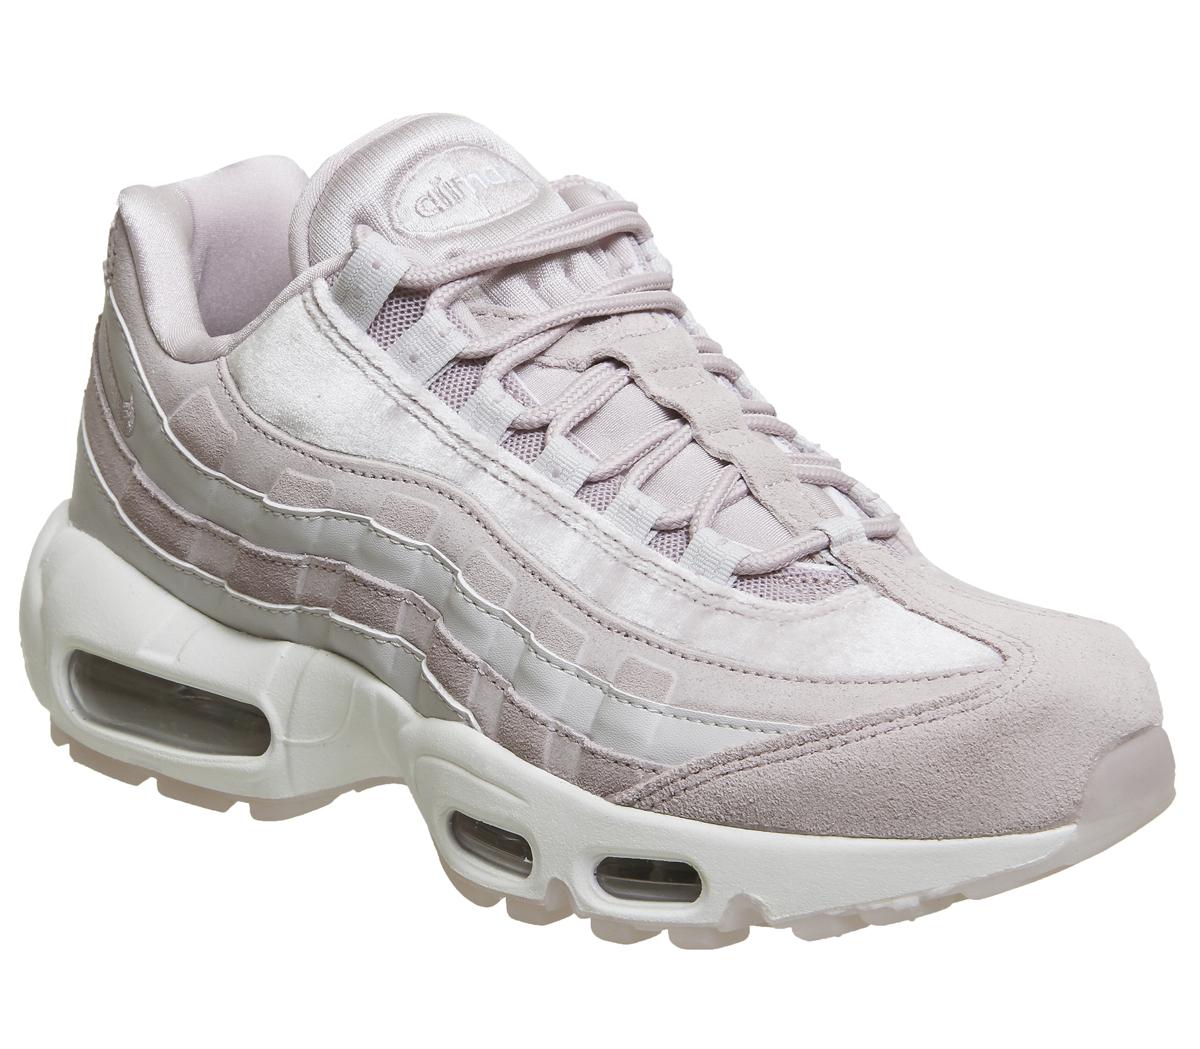 Nike Air Max 95 Particle Rose Velvet - Hers trainers